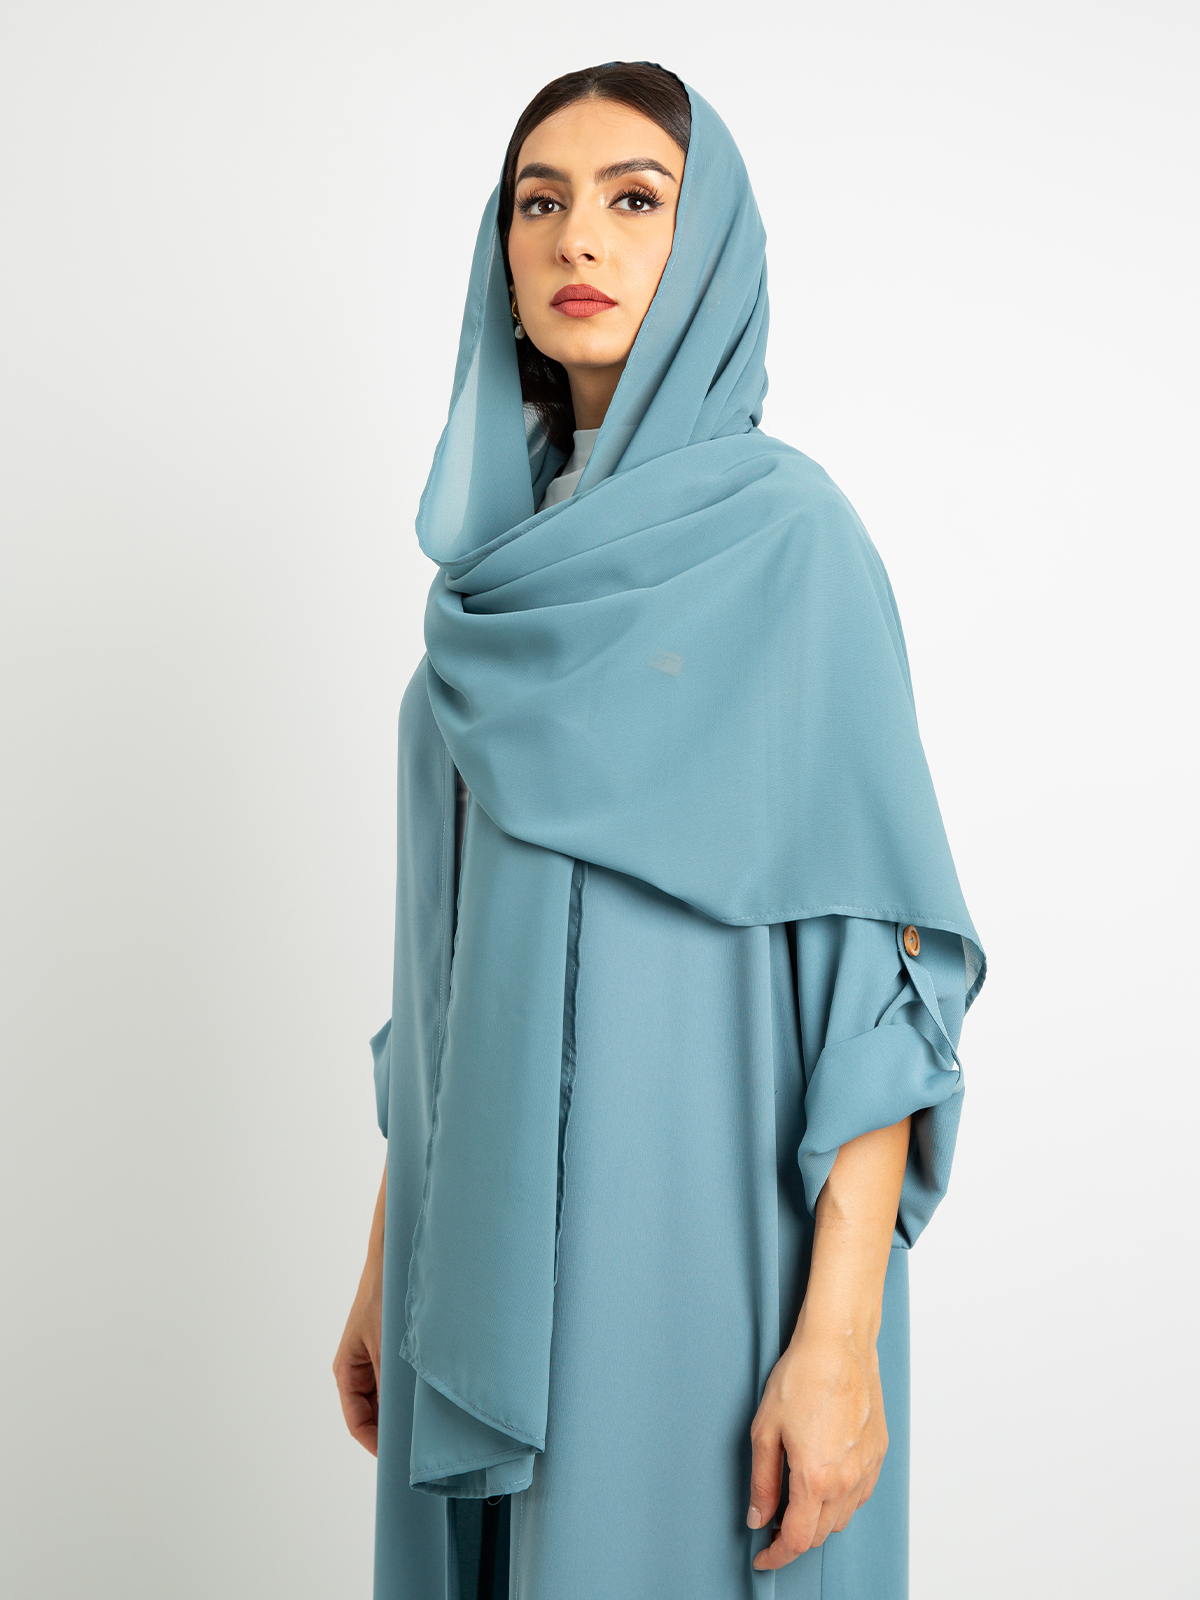 Sky Blue - Regular-fit Long Abaya with adjustable sleeves in Crepe Fabric